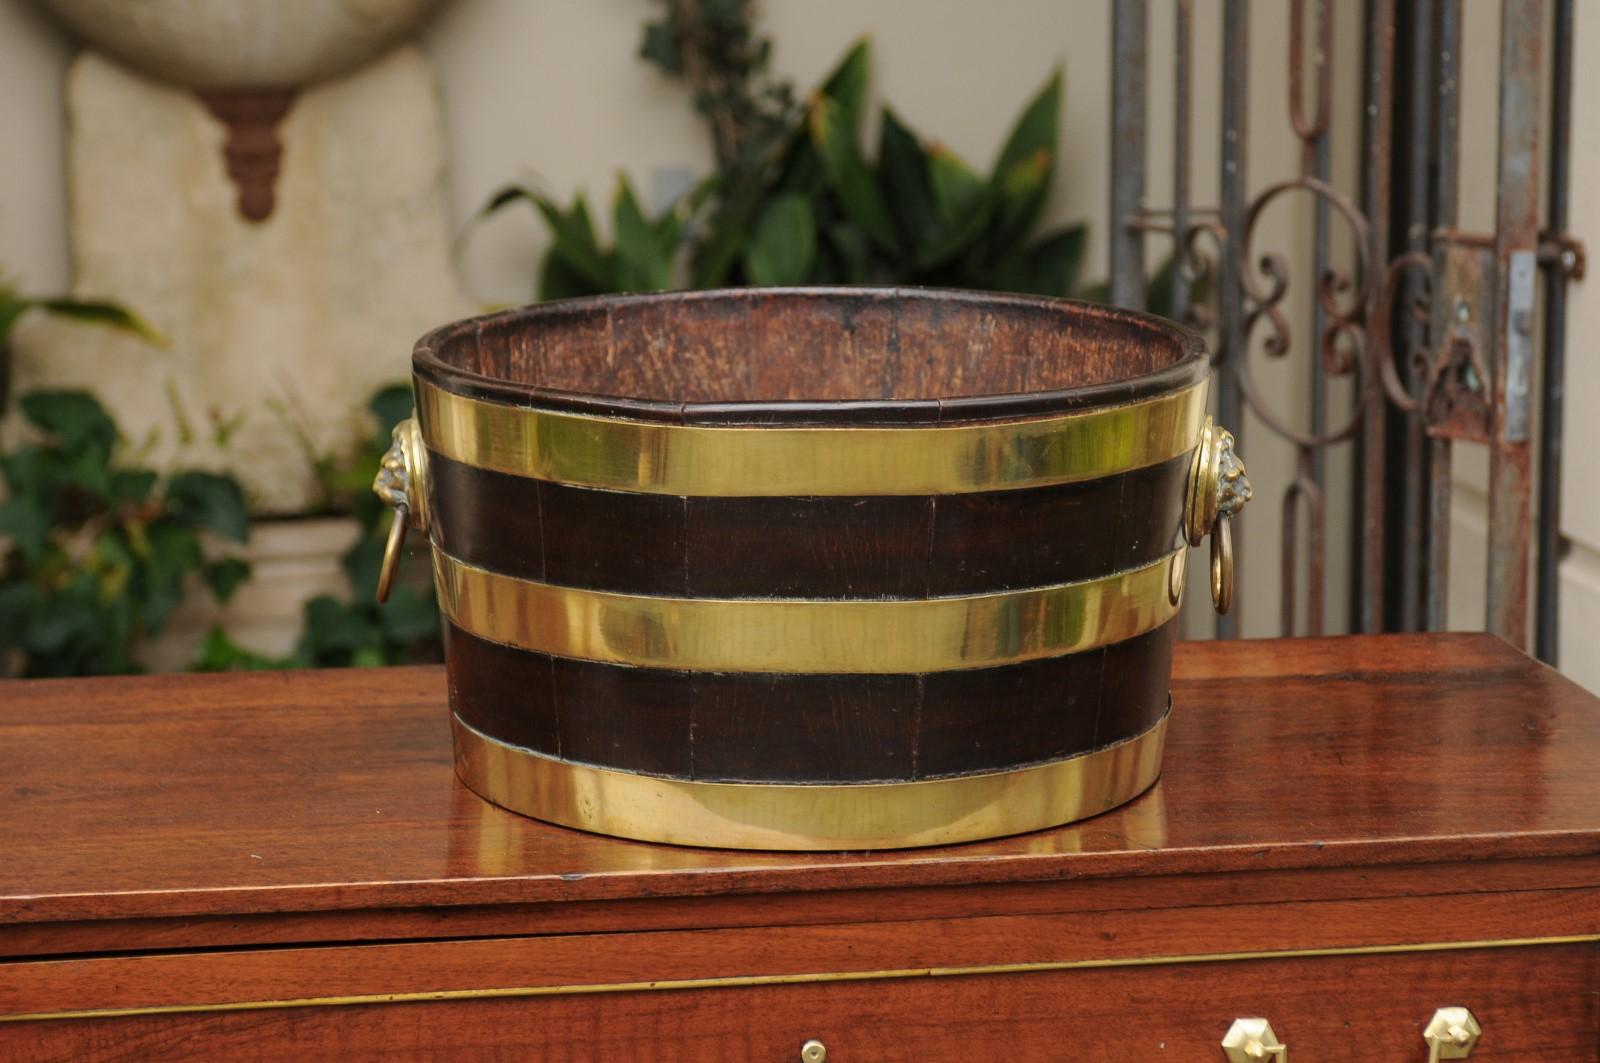 An English round oak wine cooler from the late 19th century with brass accents and lion handles. This lovely English wine cooler features a circular oak structure, strengthened on the outside by three brass horizontal braces. The cooler showcases